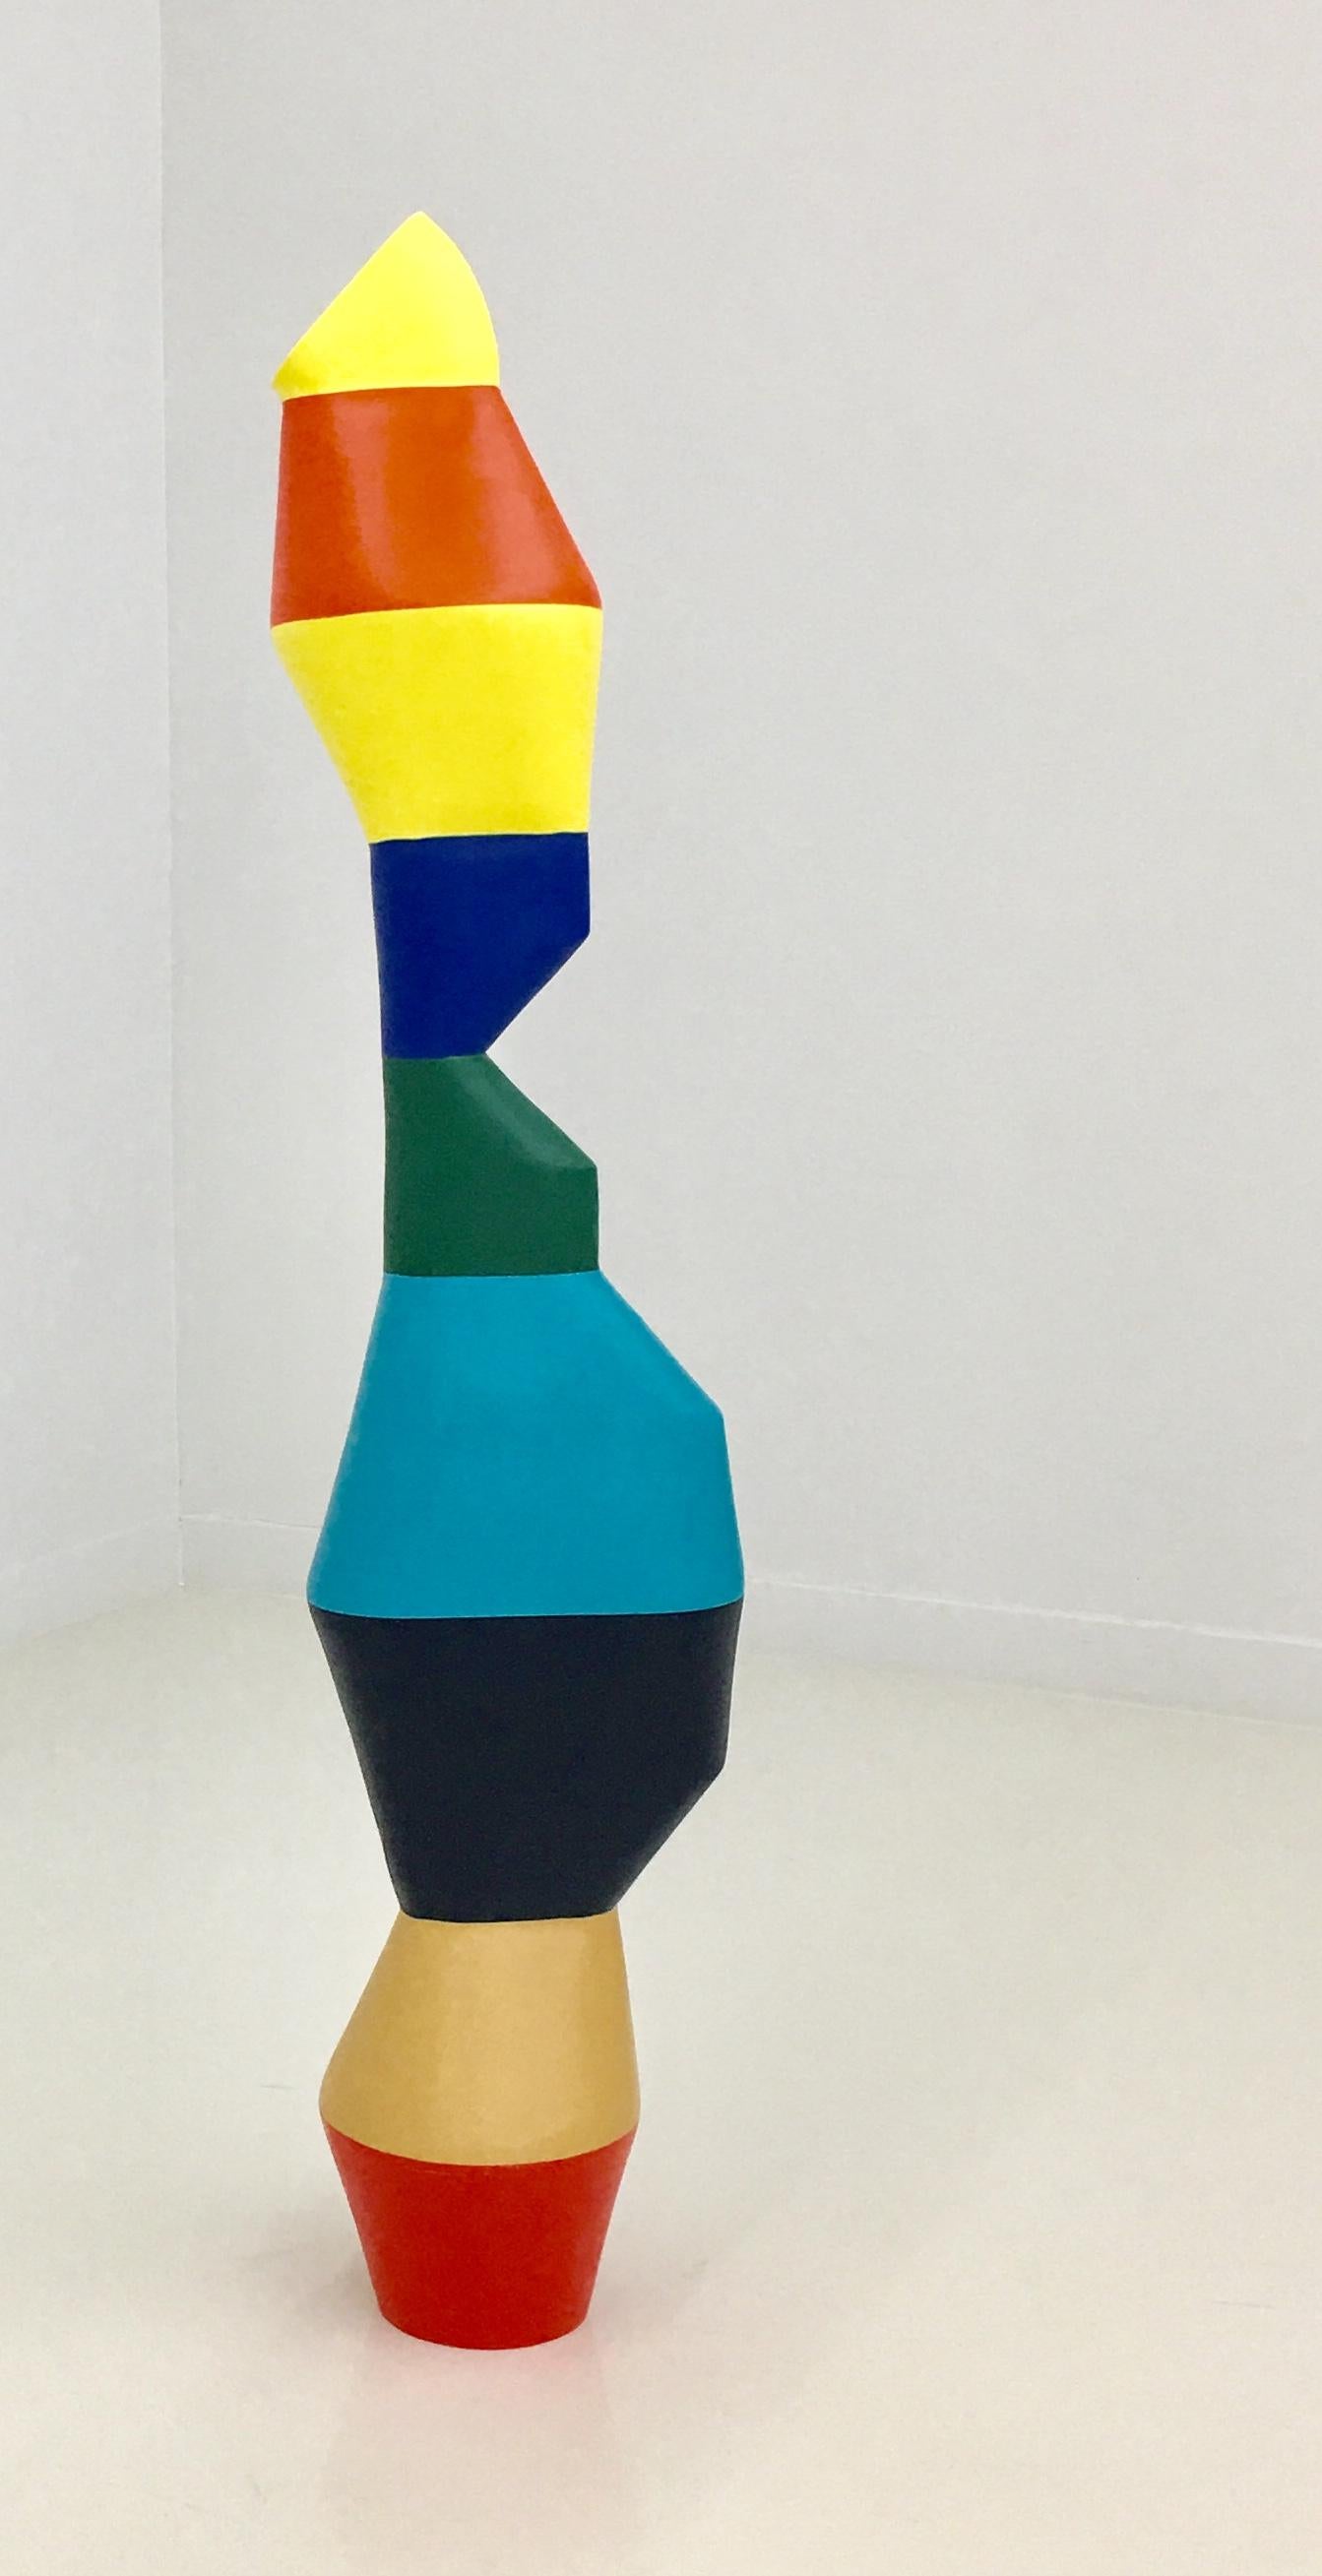 The Totem form and the relationship between colors are transposed into three-dimensionality with "Resin sculpture" sculpture, which, treated like collage, echoes the painting’s even surface in a troubling manner.